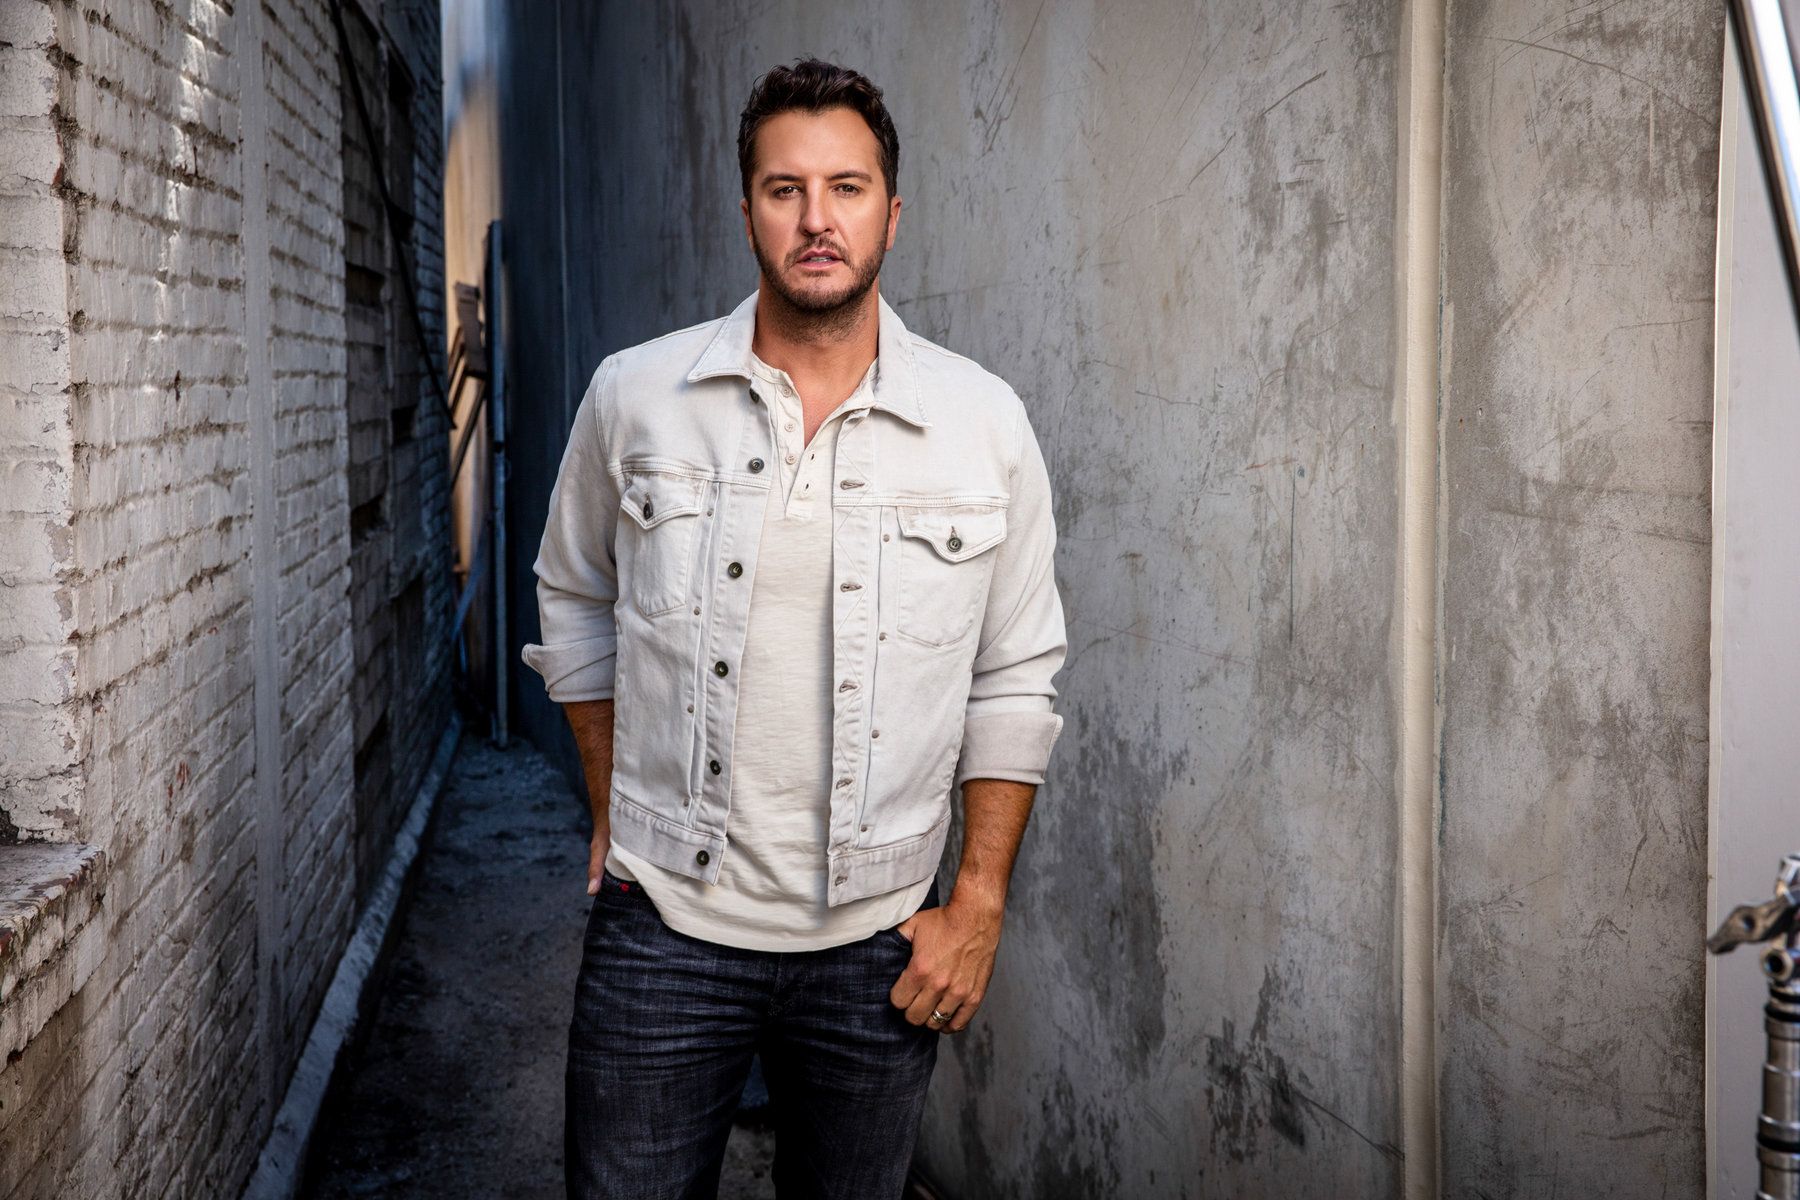 Luke Bryan to Participate in Verizon’s “The Big Concert for Small Business” During Super Bowl LV After-Party